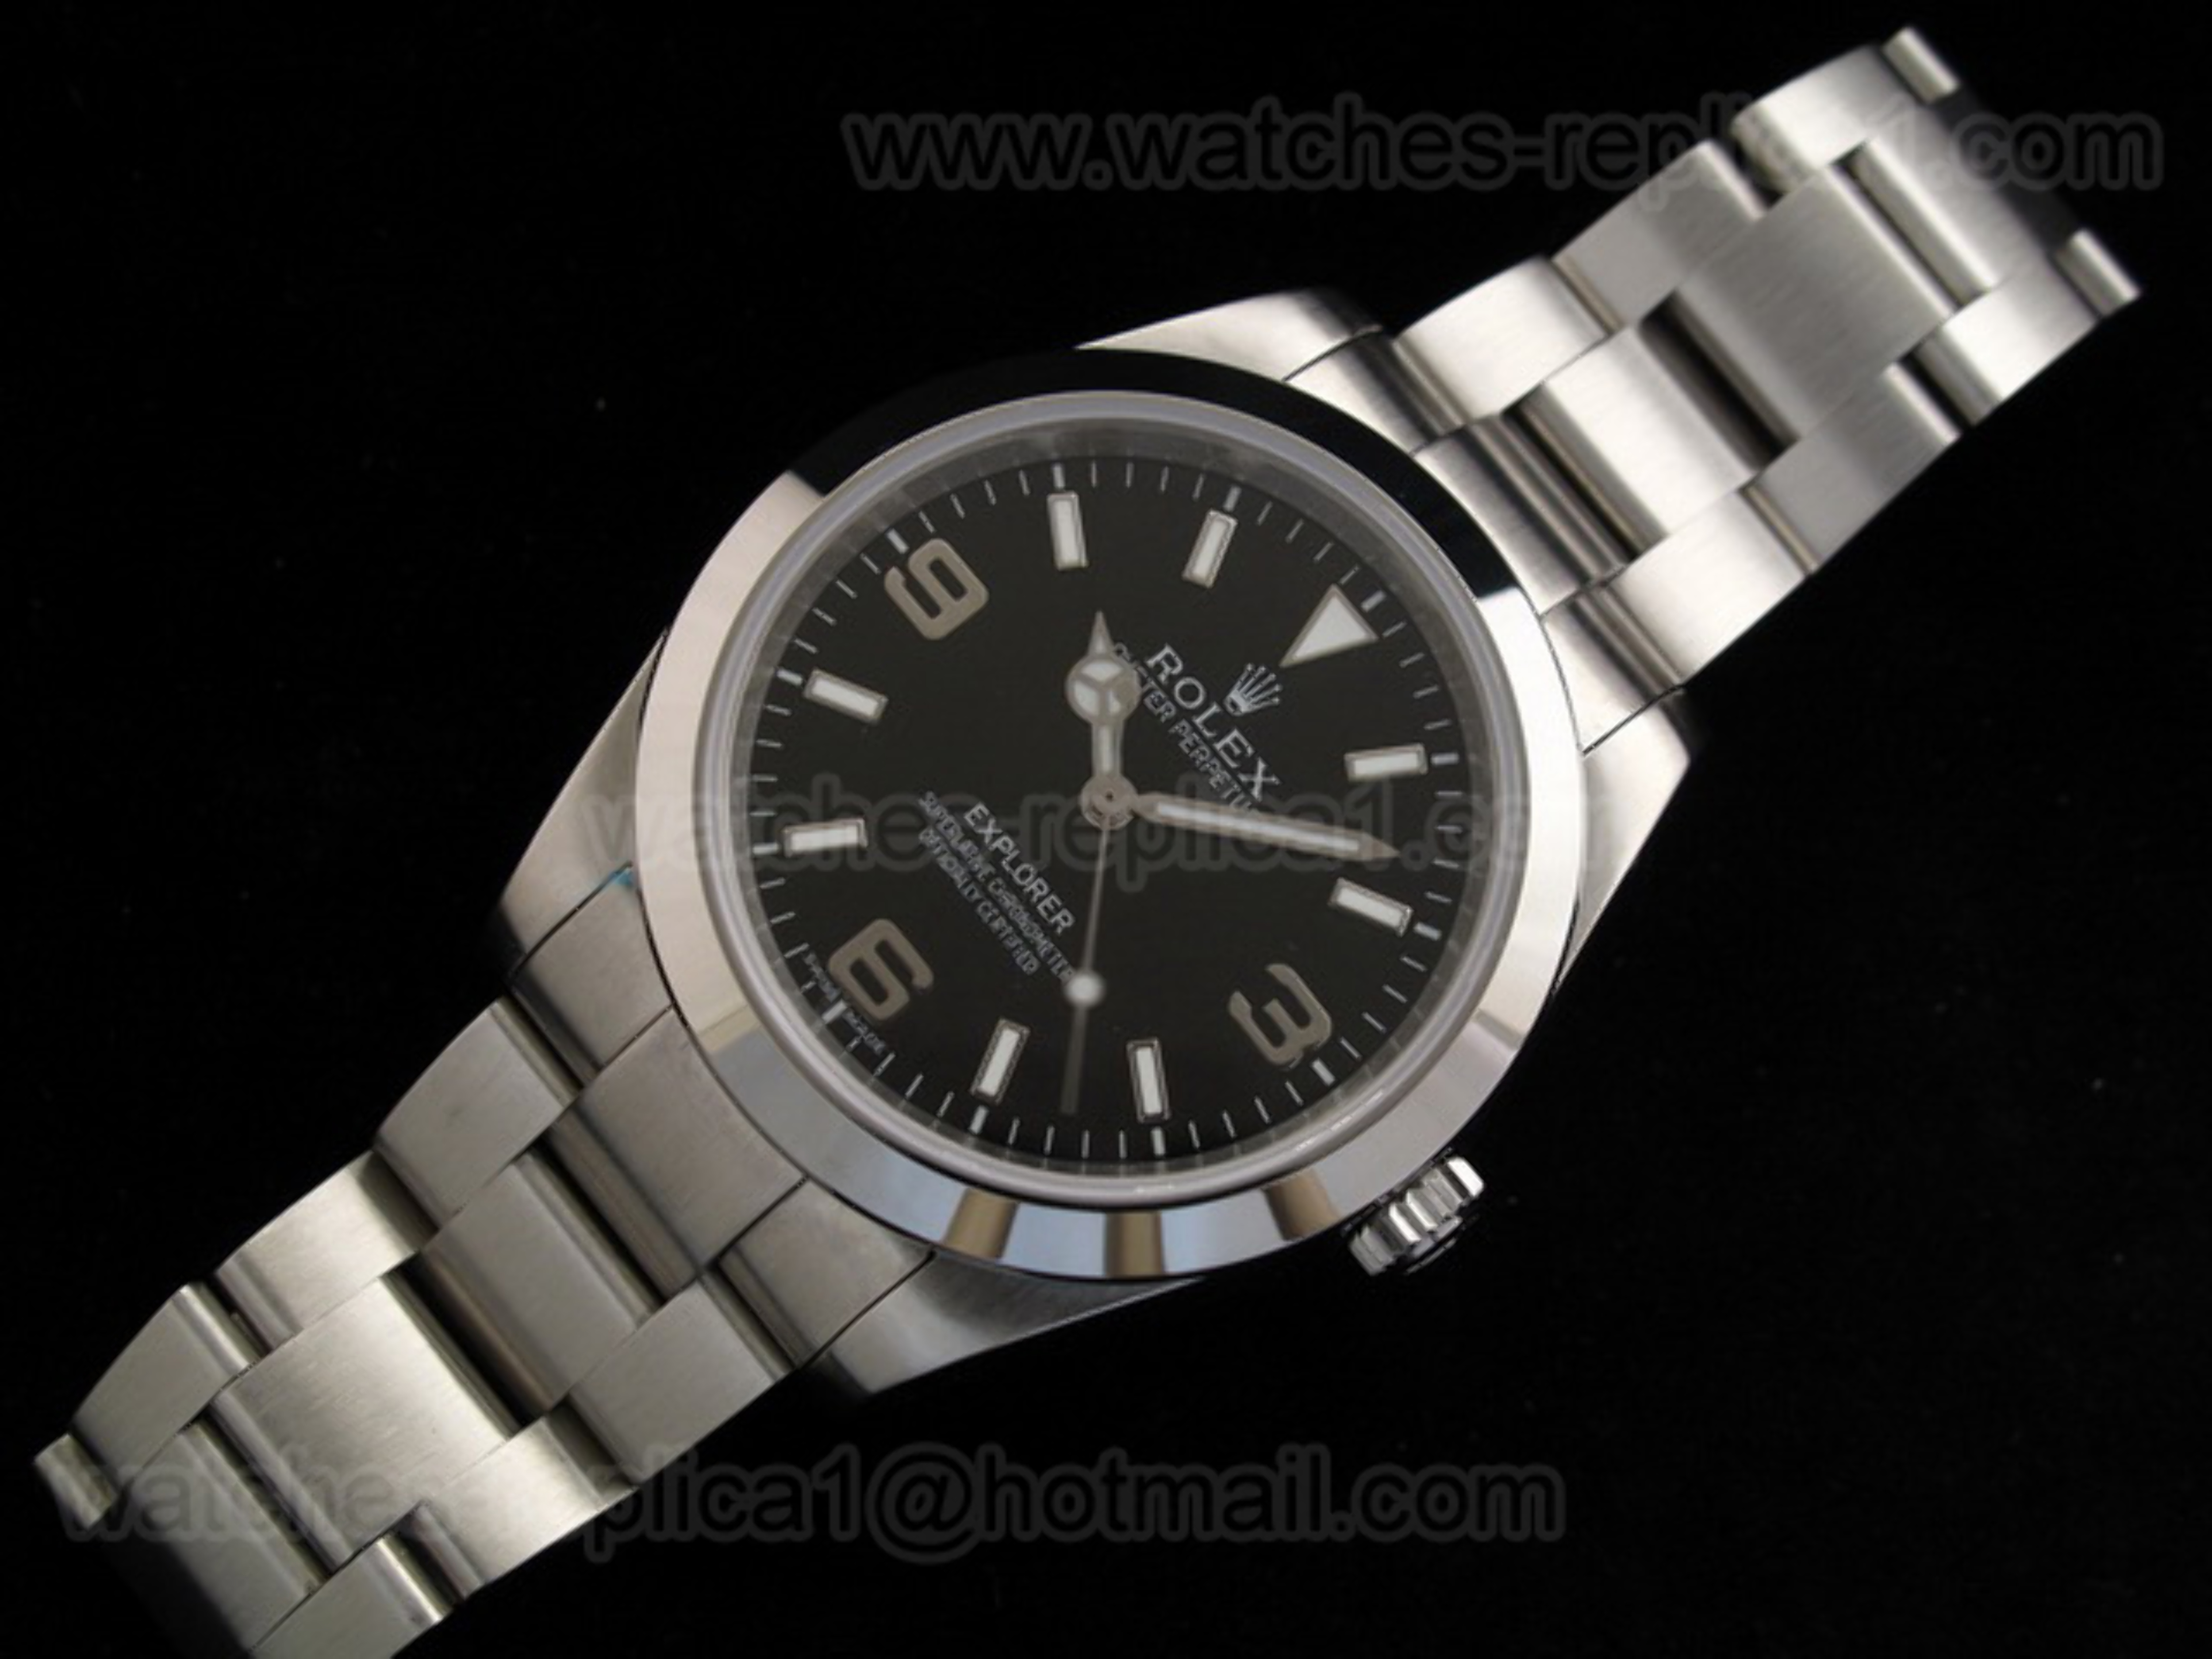 All the Rolex replica watches